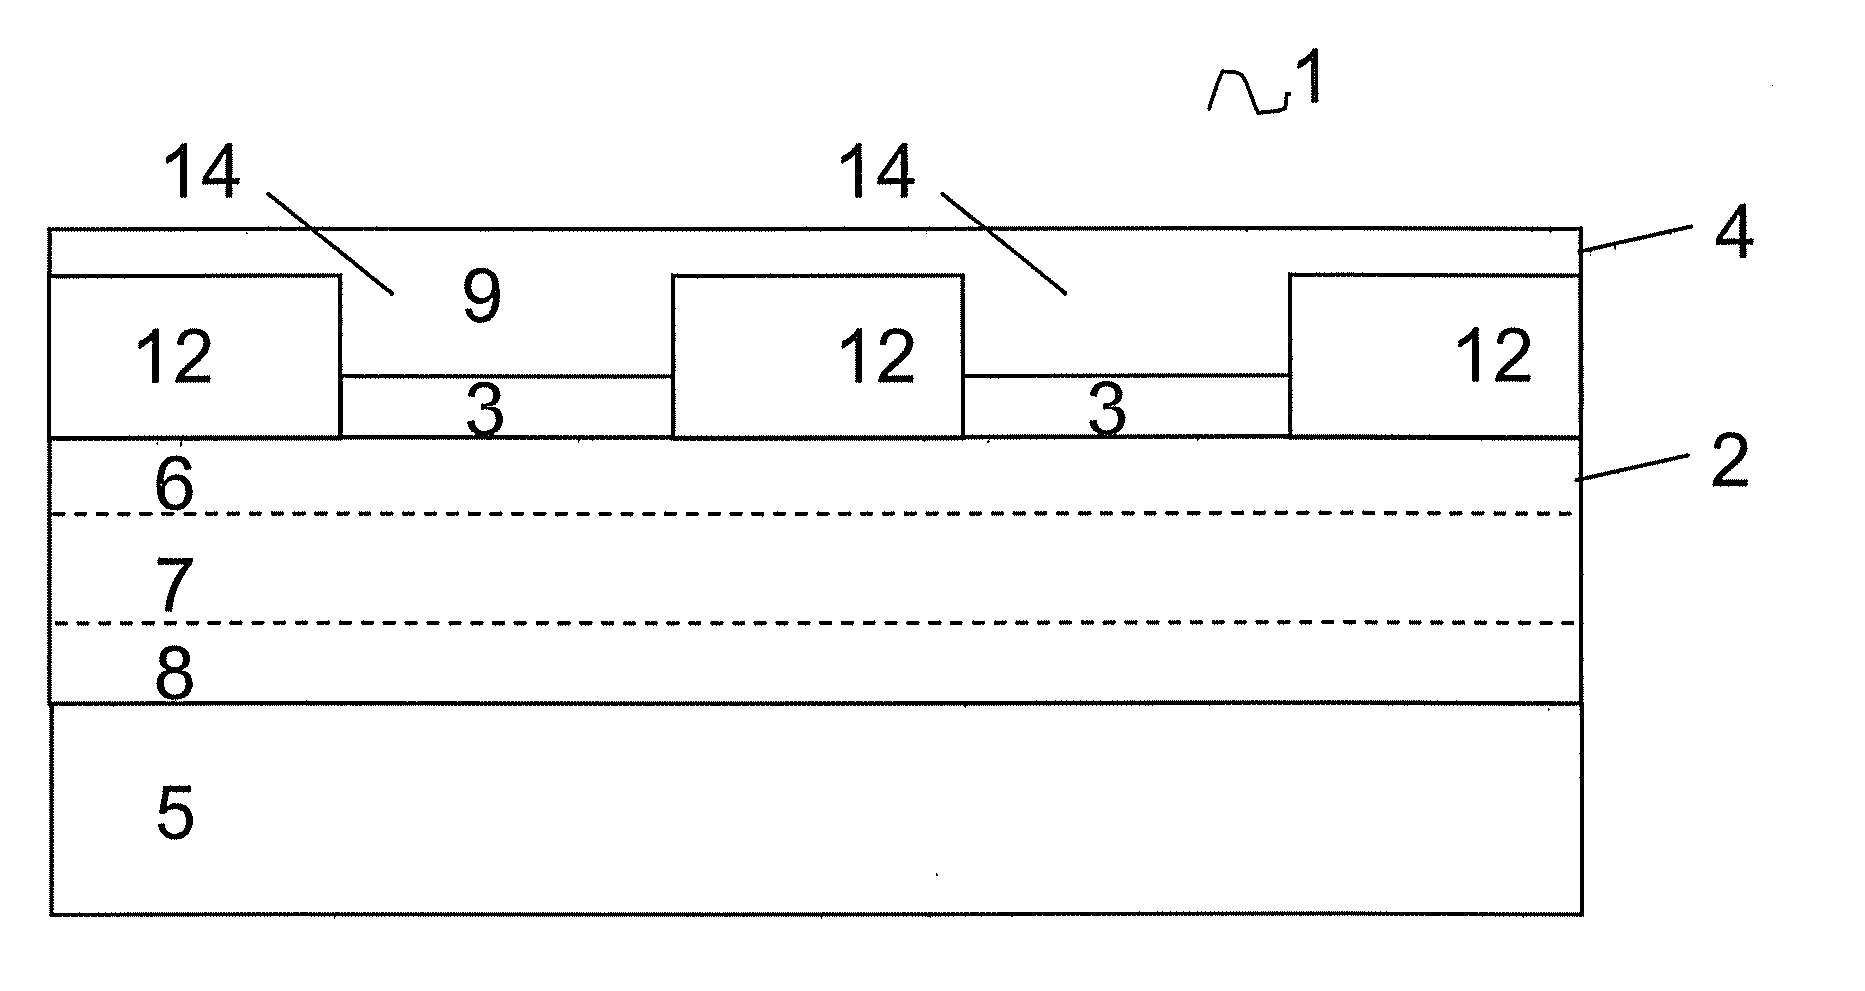 Method for Manufacturing a Resistive Switching Memory Cell Comprising a Nickel Oxide Layer Operable at Low-Power and Memory Cells Obtained Thereof